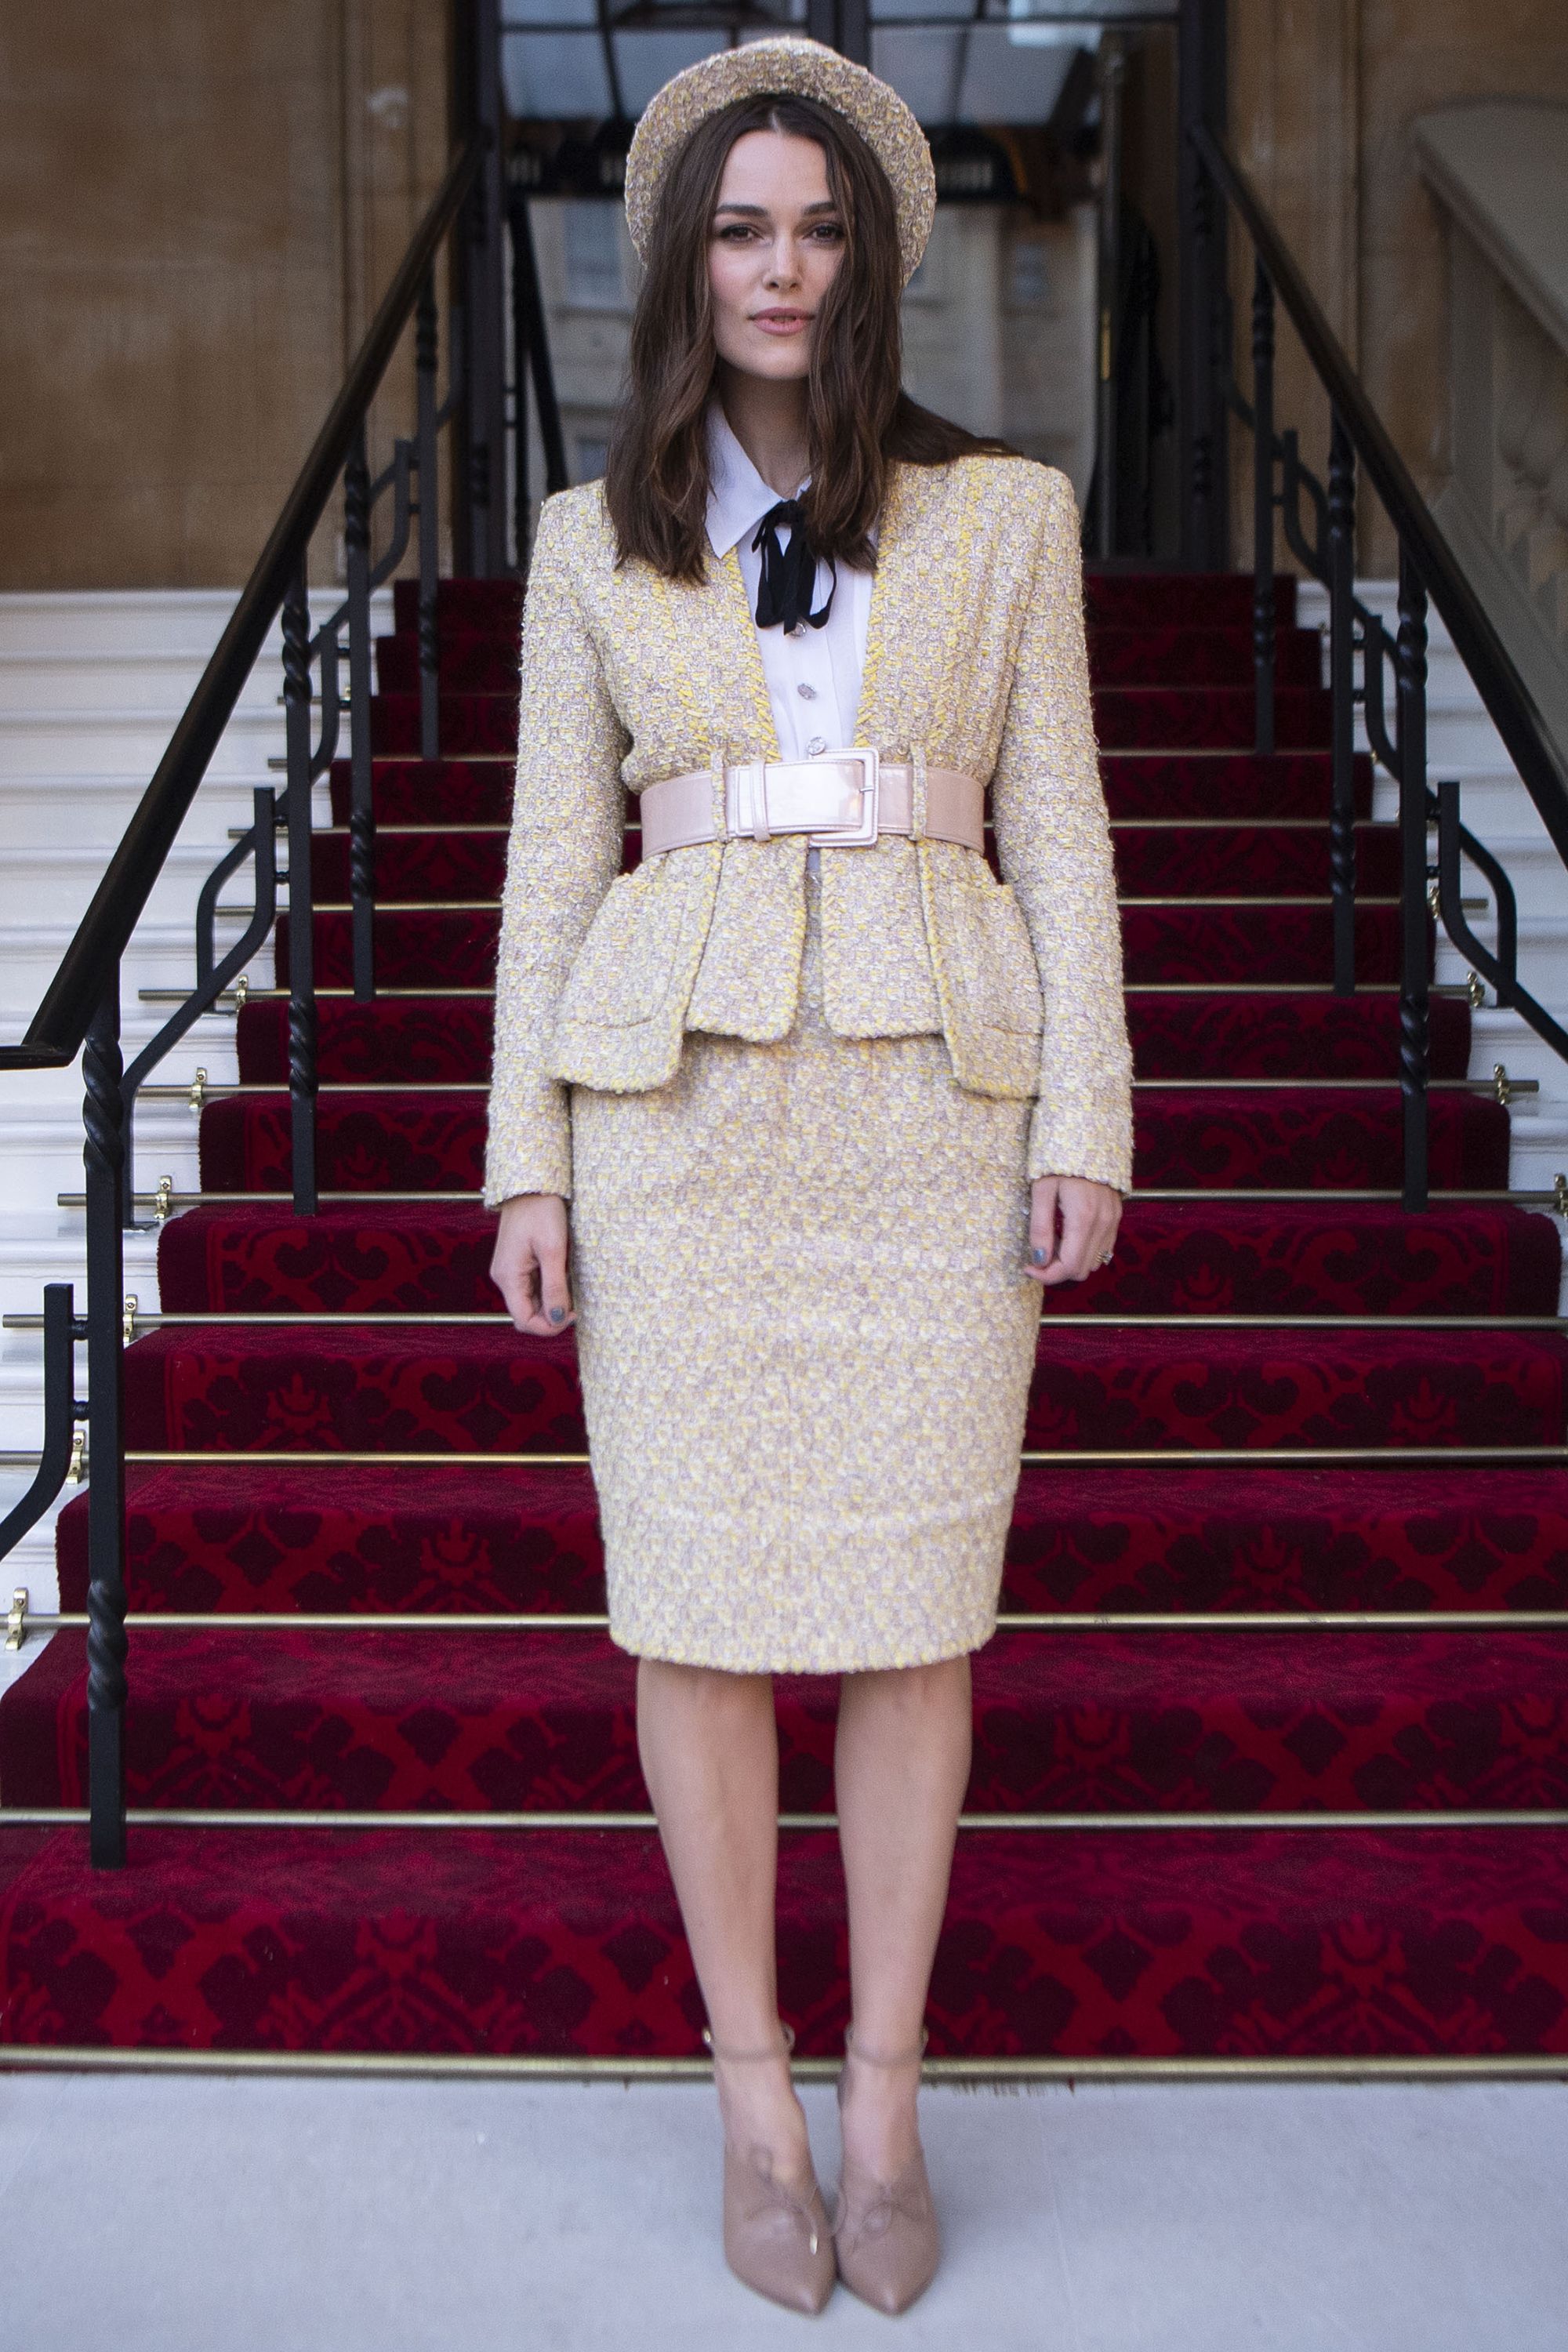 Keira Knightley Receives OBE from Prince Charles in a Chanel Skirt